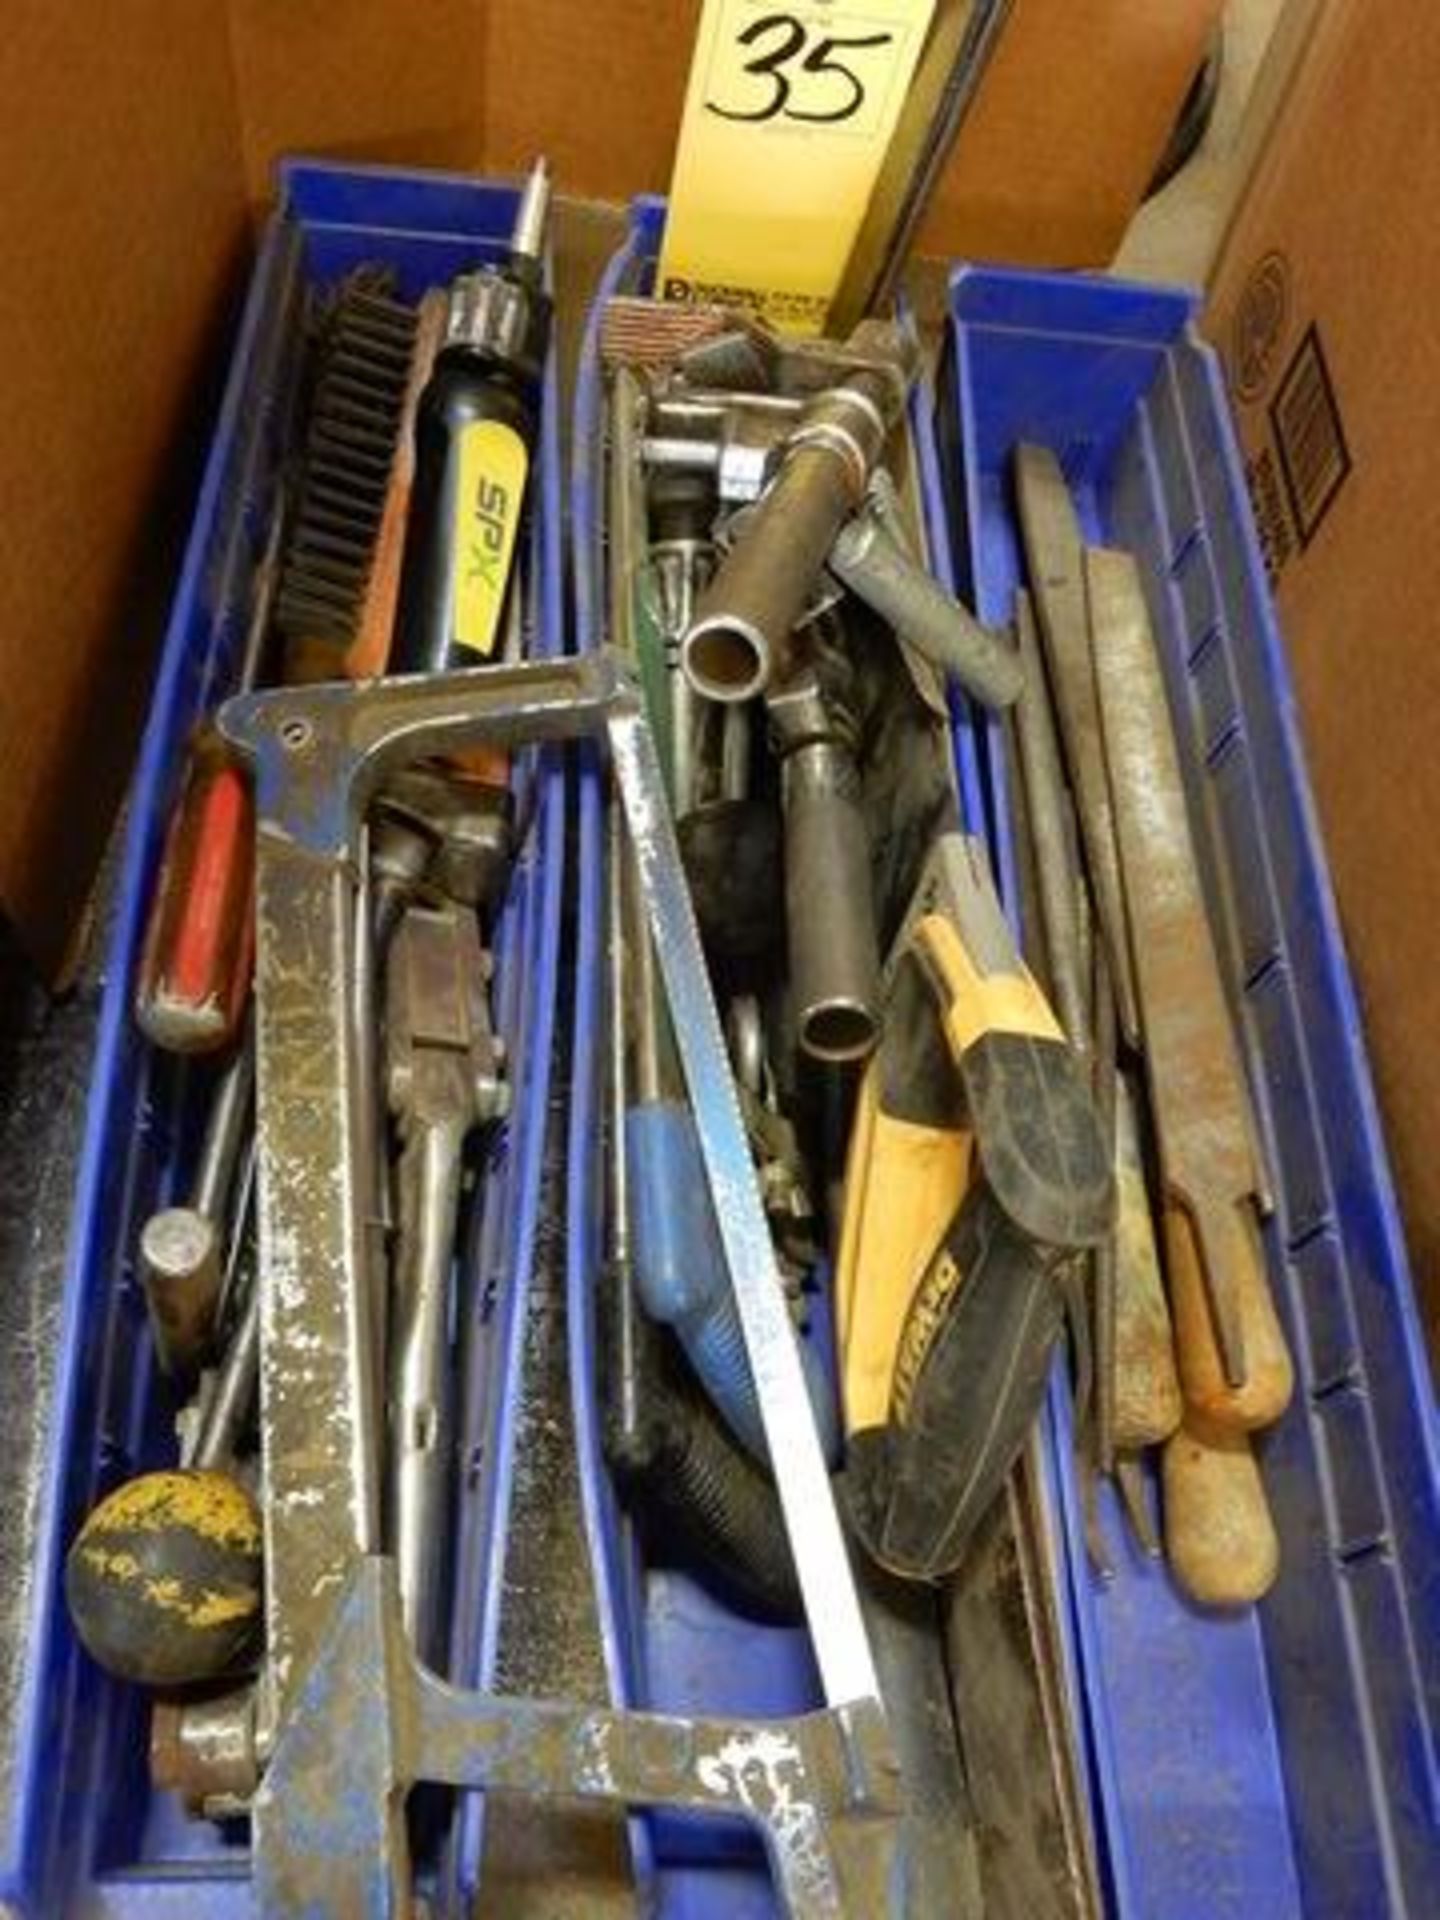 LOT MISC. TOOLS TO INCLUDE - FLAT FILES, WIRE BRUSHES, HAND SAWS - Image 2 of 2